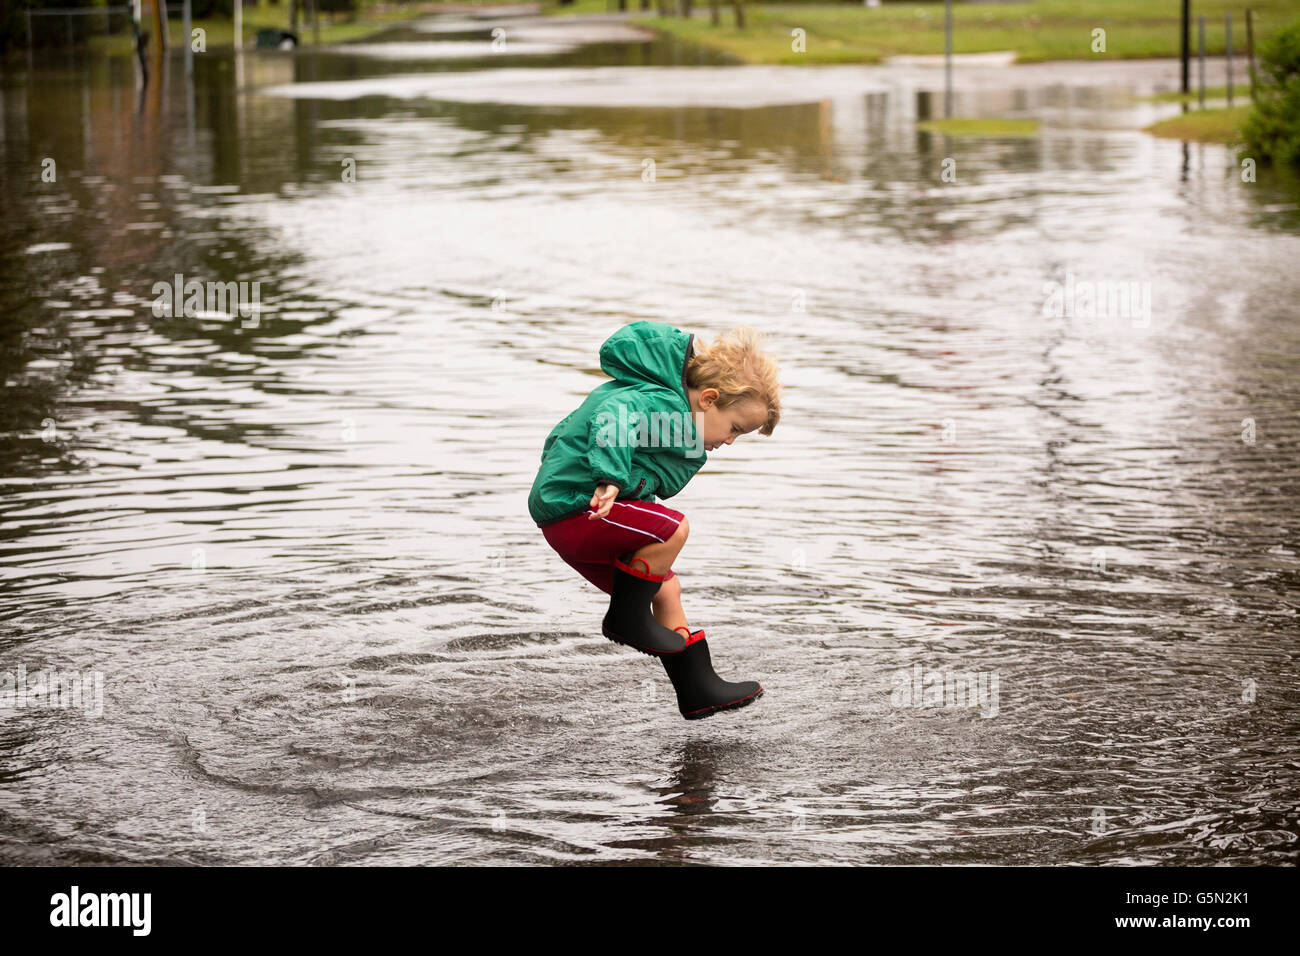 Caucasian boy jumping in puddle Stock Photo